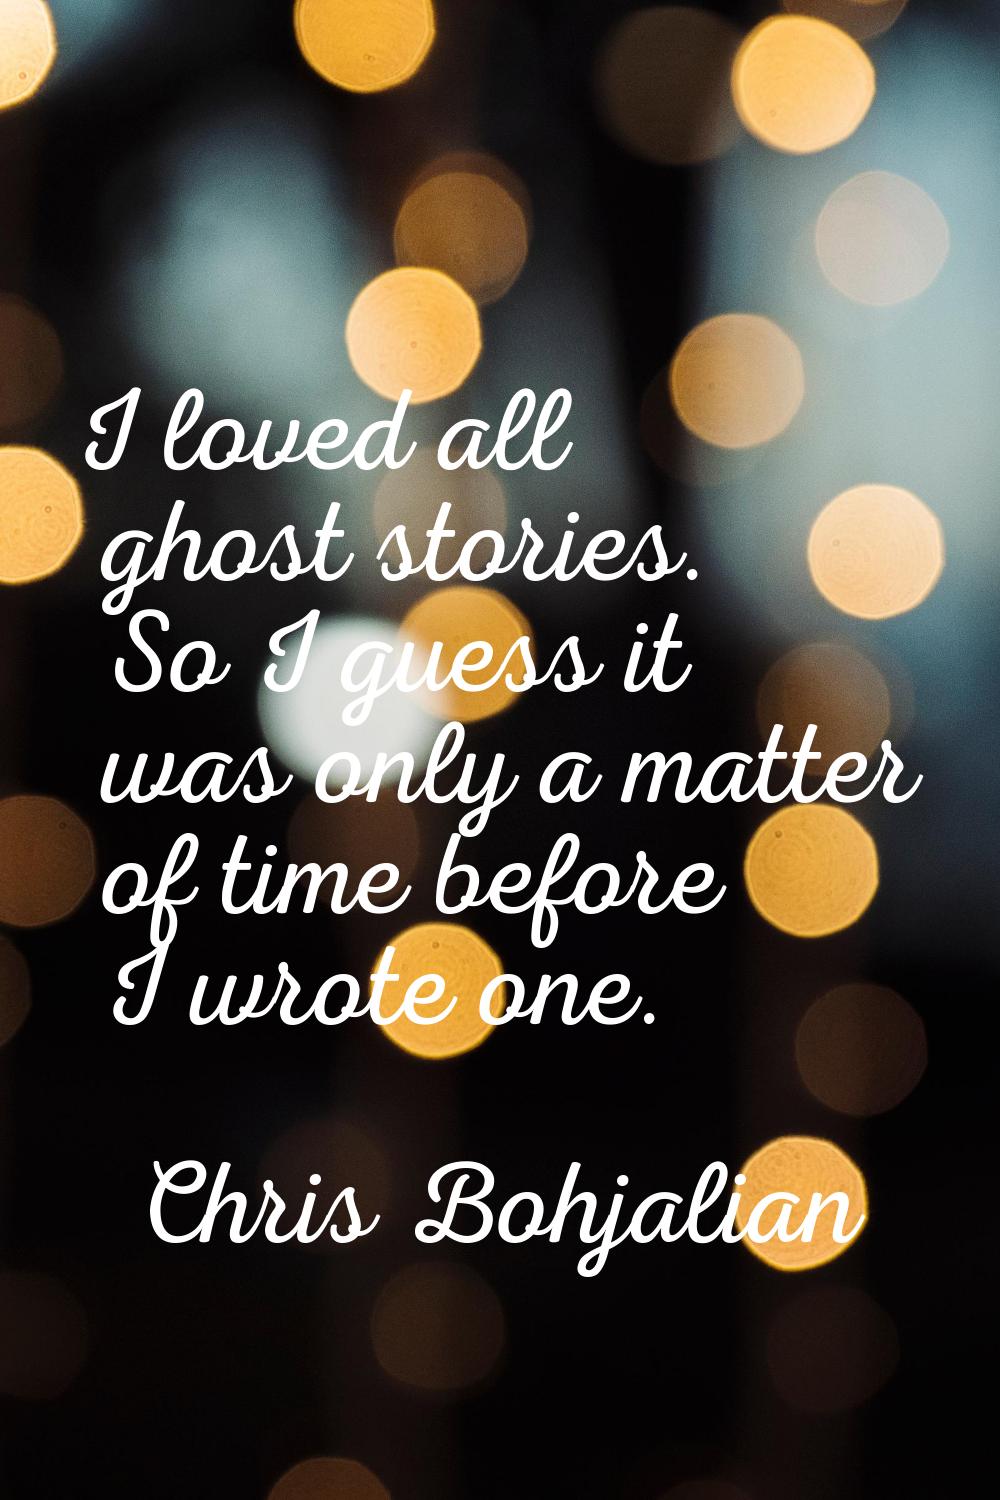 I loved all ghost stories. So I guess it was only a matter of time before I wrote one.